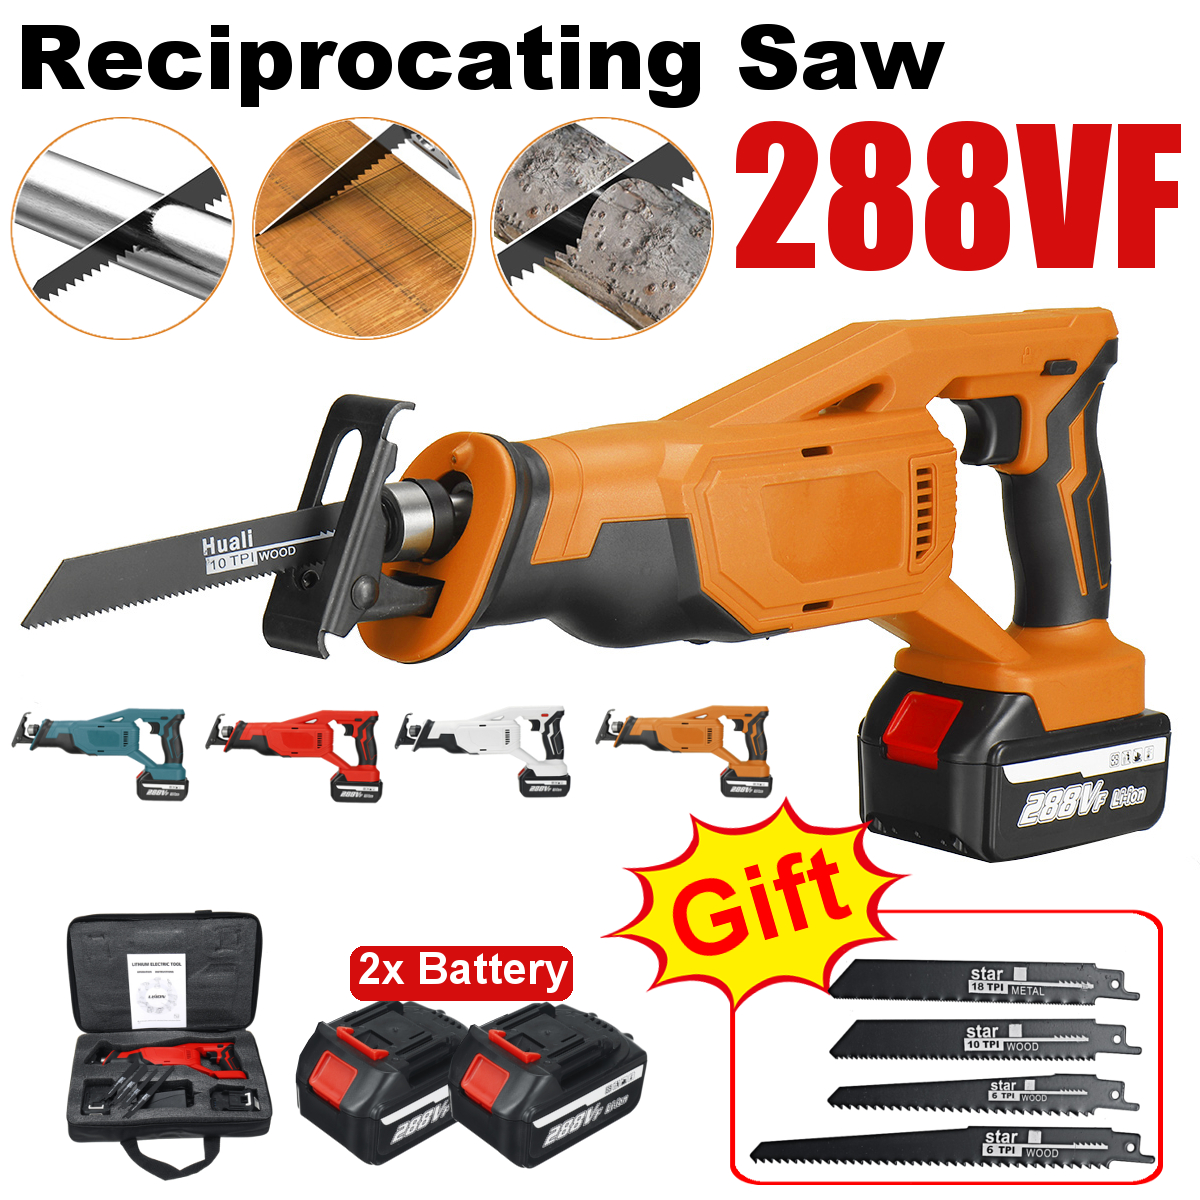 288VF-Cordless-Reciprocating-Saw-Rechargeable-Electric-Recip-Sabre-Saw-W-4pcs-Blade--2pcs-Battery-Wo-1868930-2